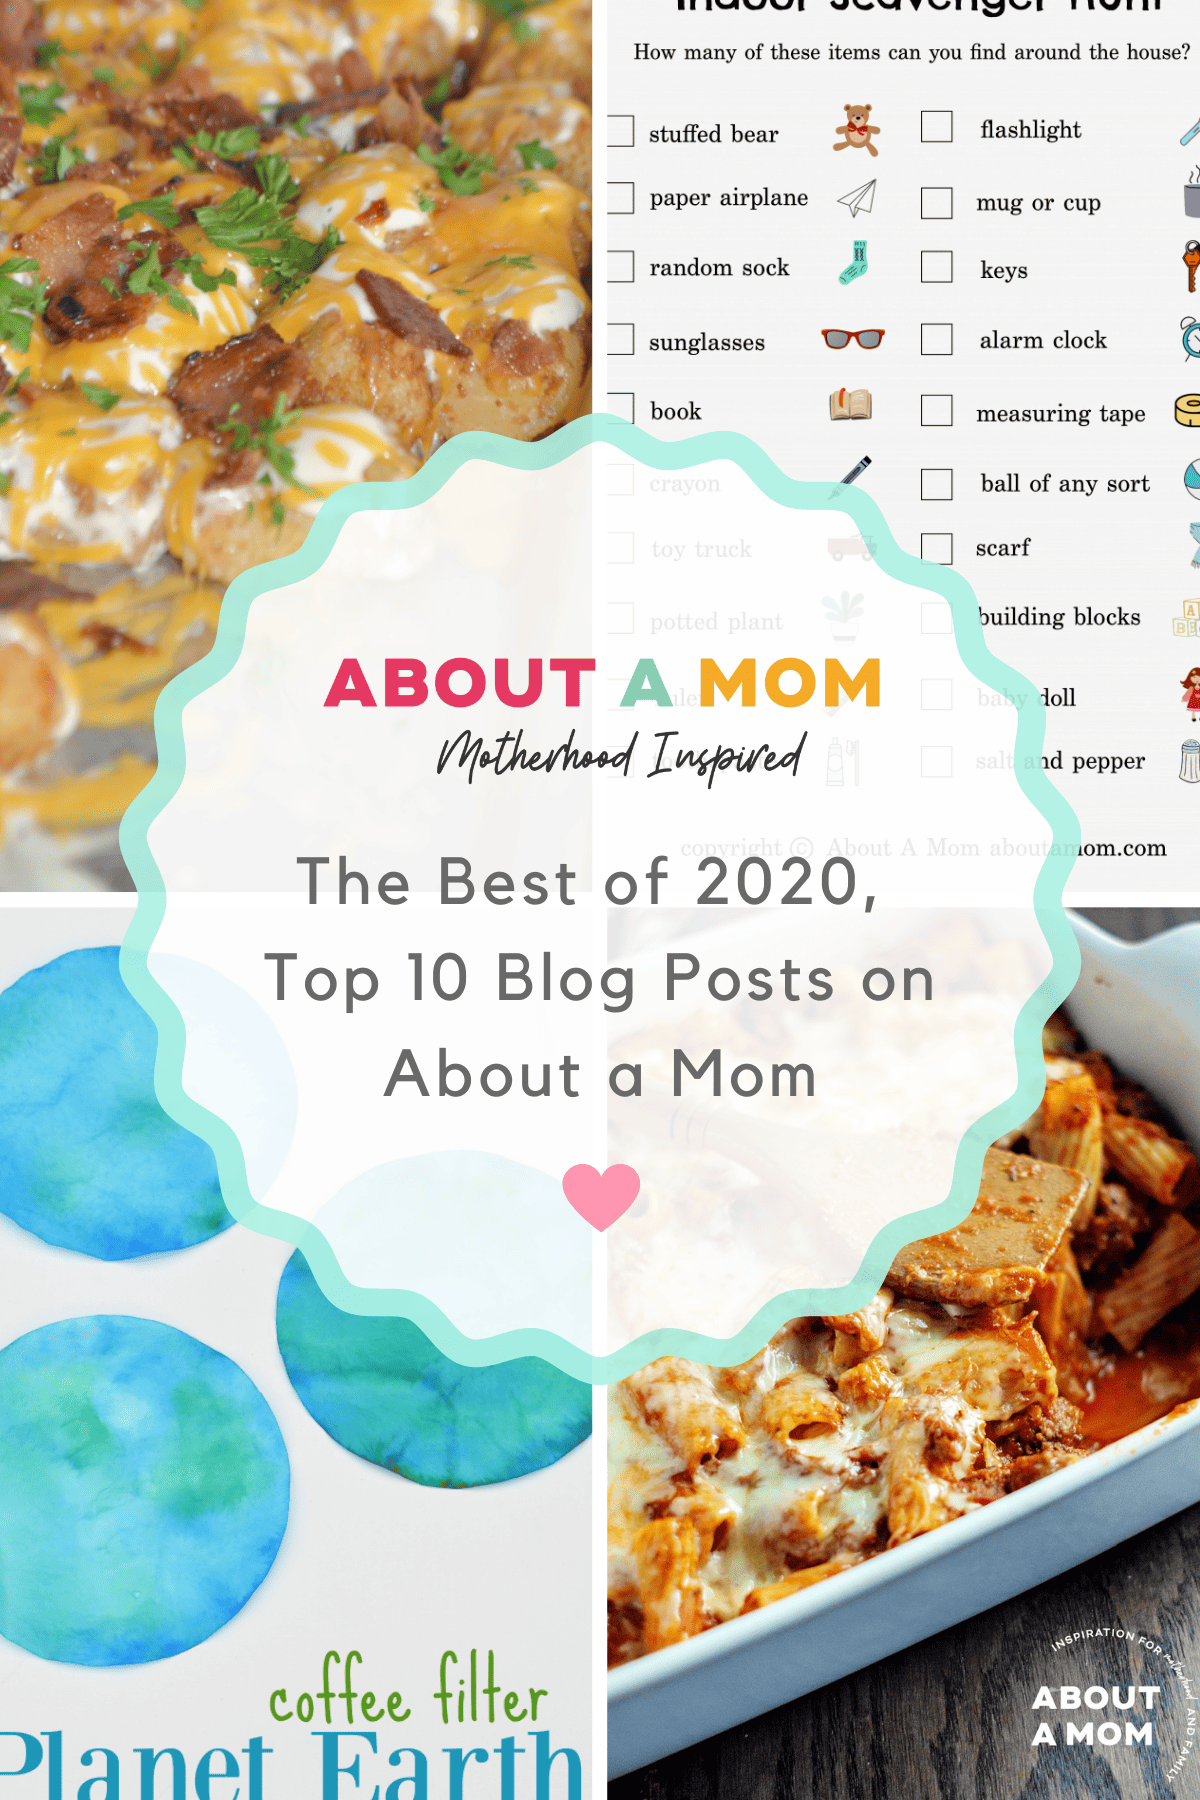 The best of 2020. These are the Top 10 Blog Posts on About a Mom in 2020, including top recipes, crafts for kids, learning tools and printables.